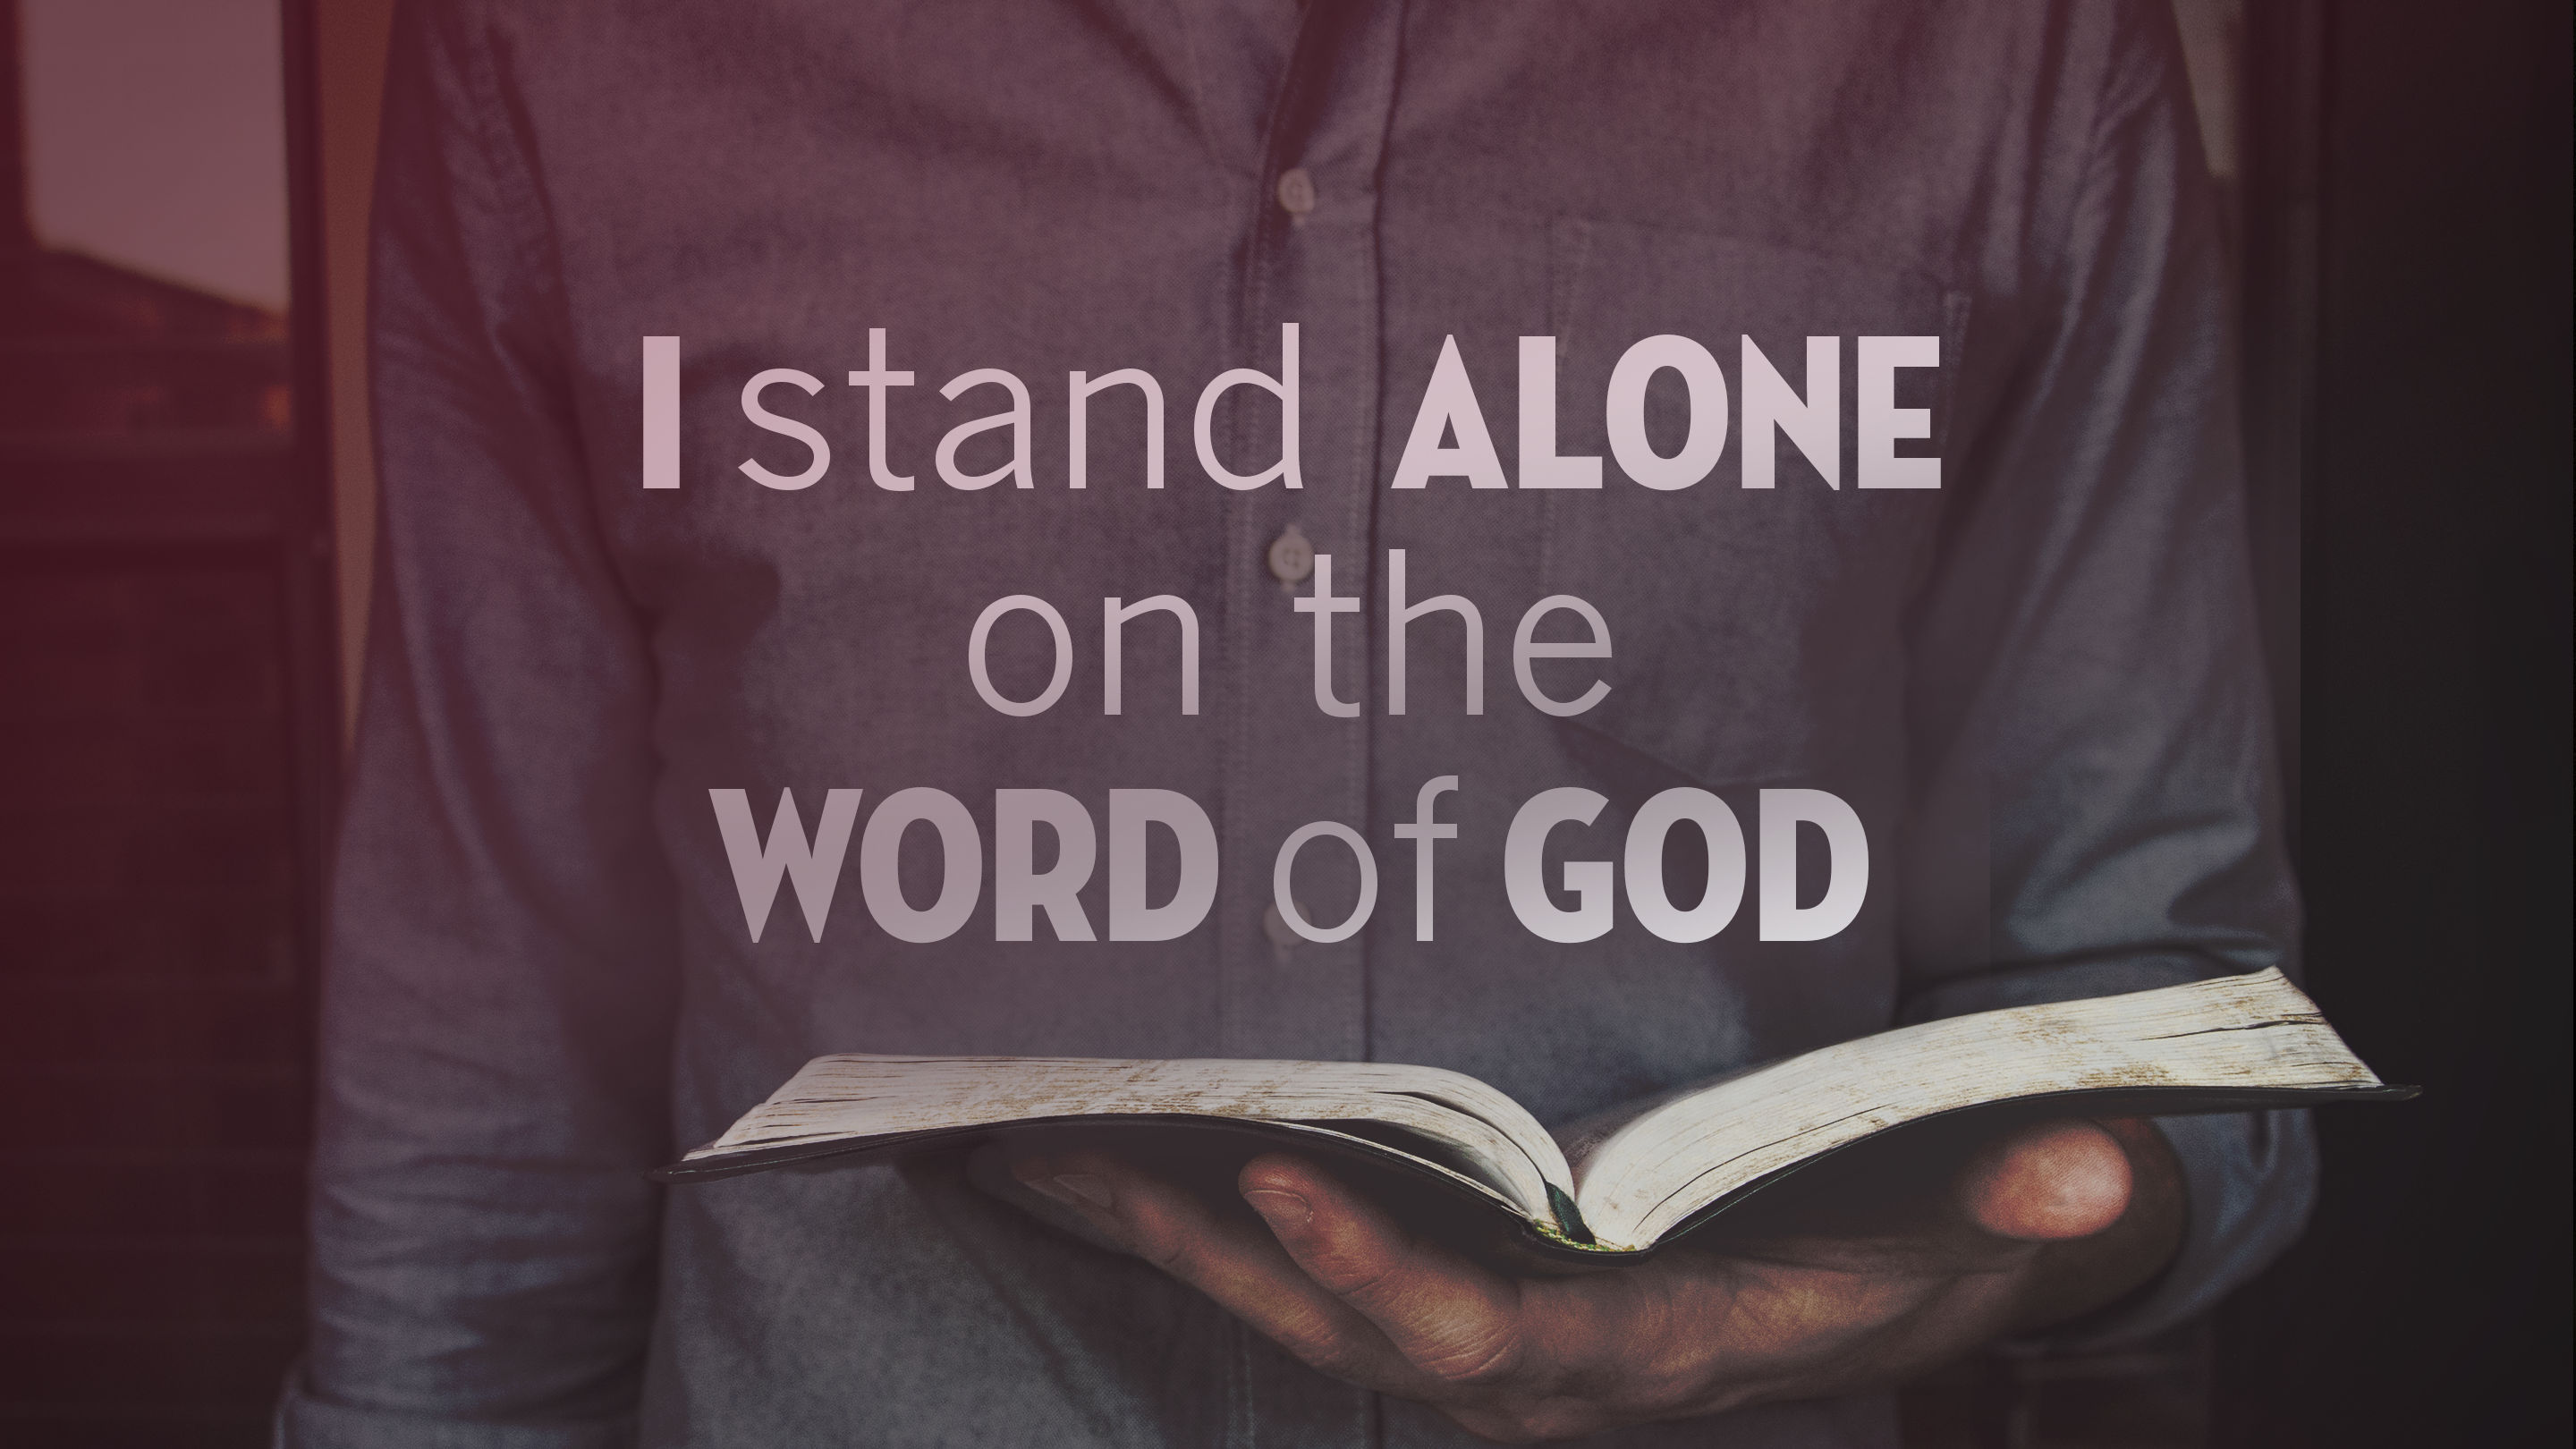 I Stand Alone on the Word of God